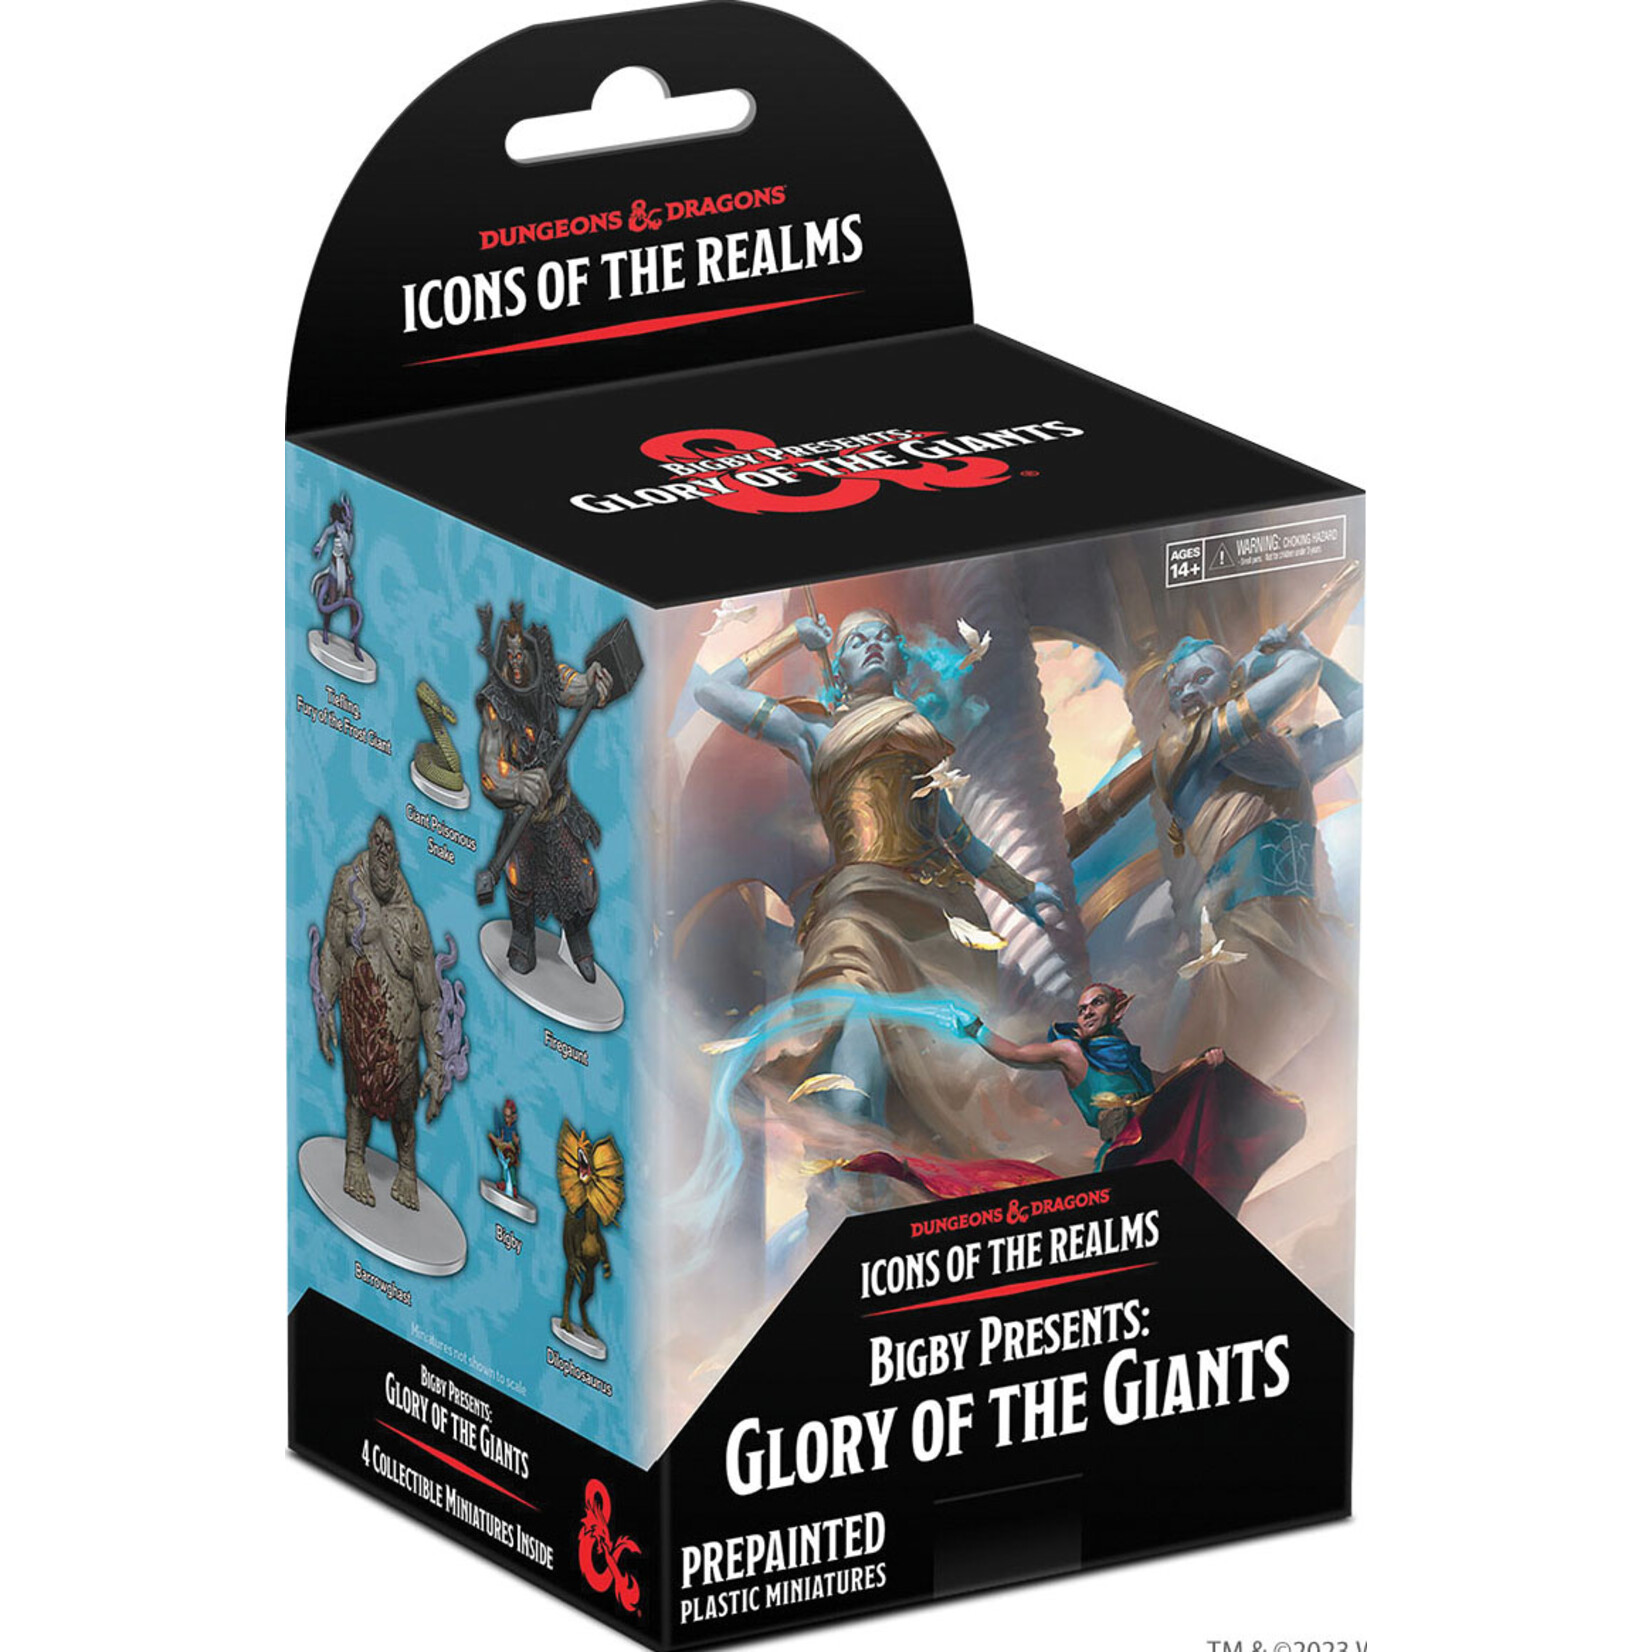 Wiz Kids D&D Prepainted Miniatures: Bigby Presents Glory of the Giants Booster Brick